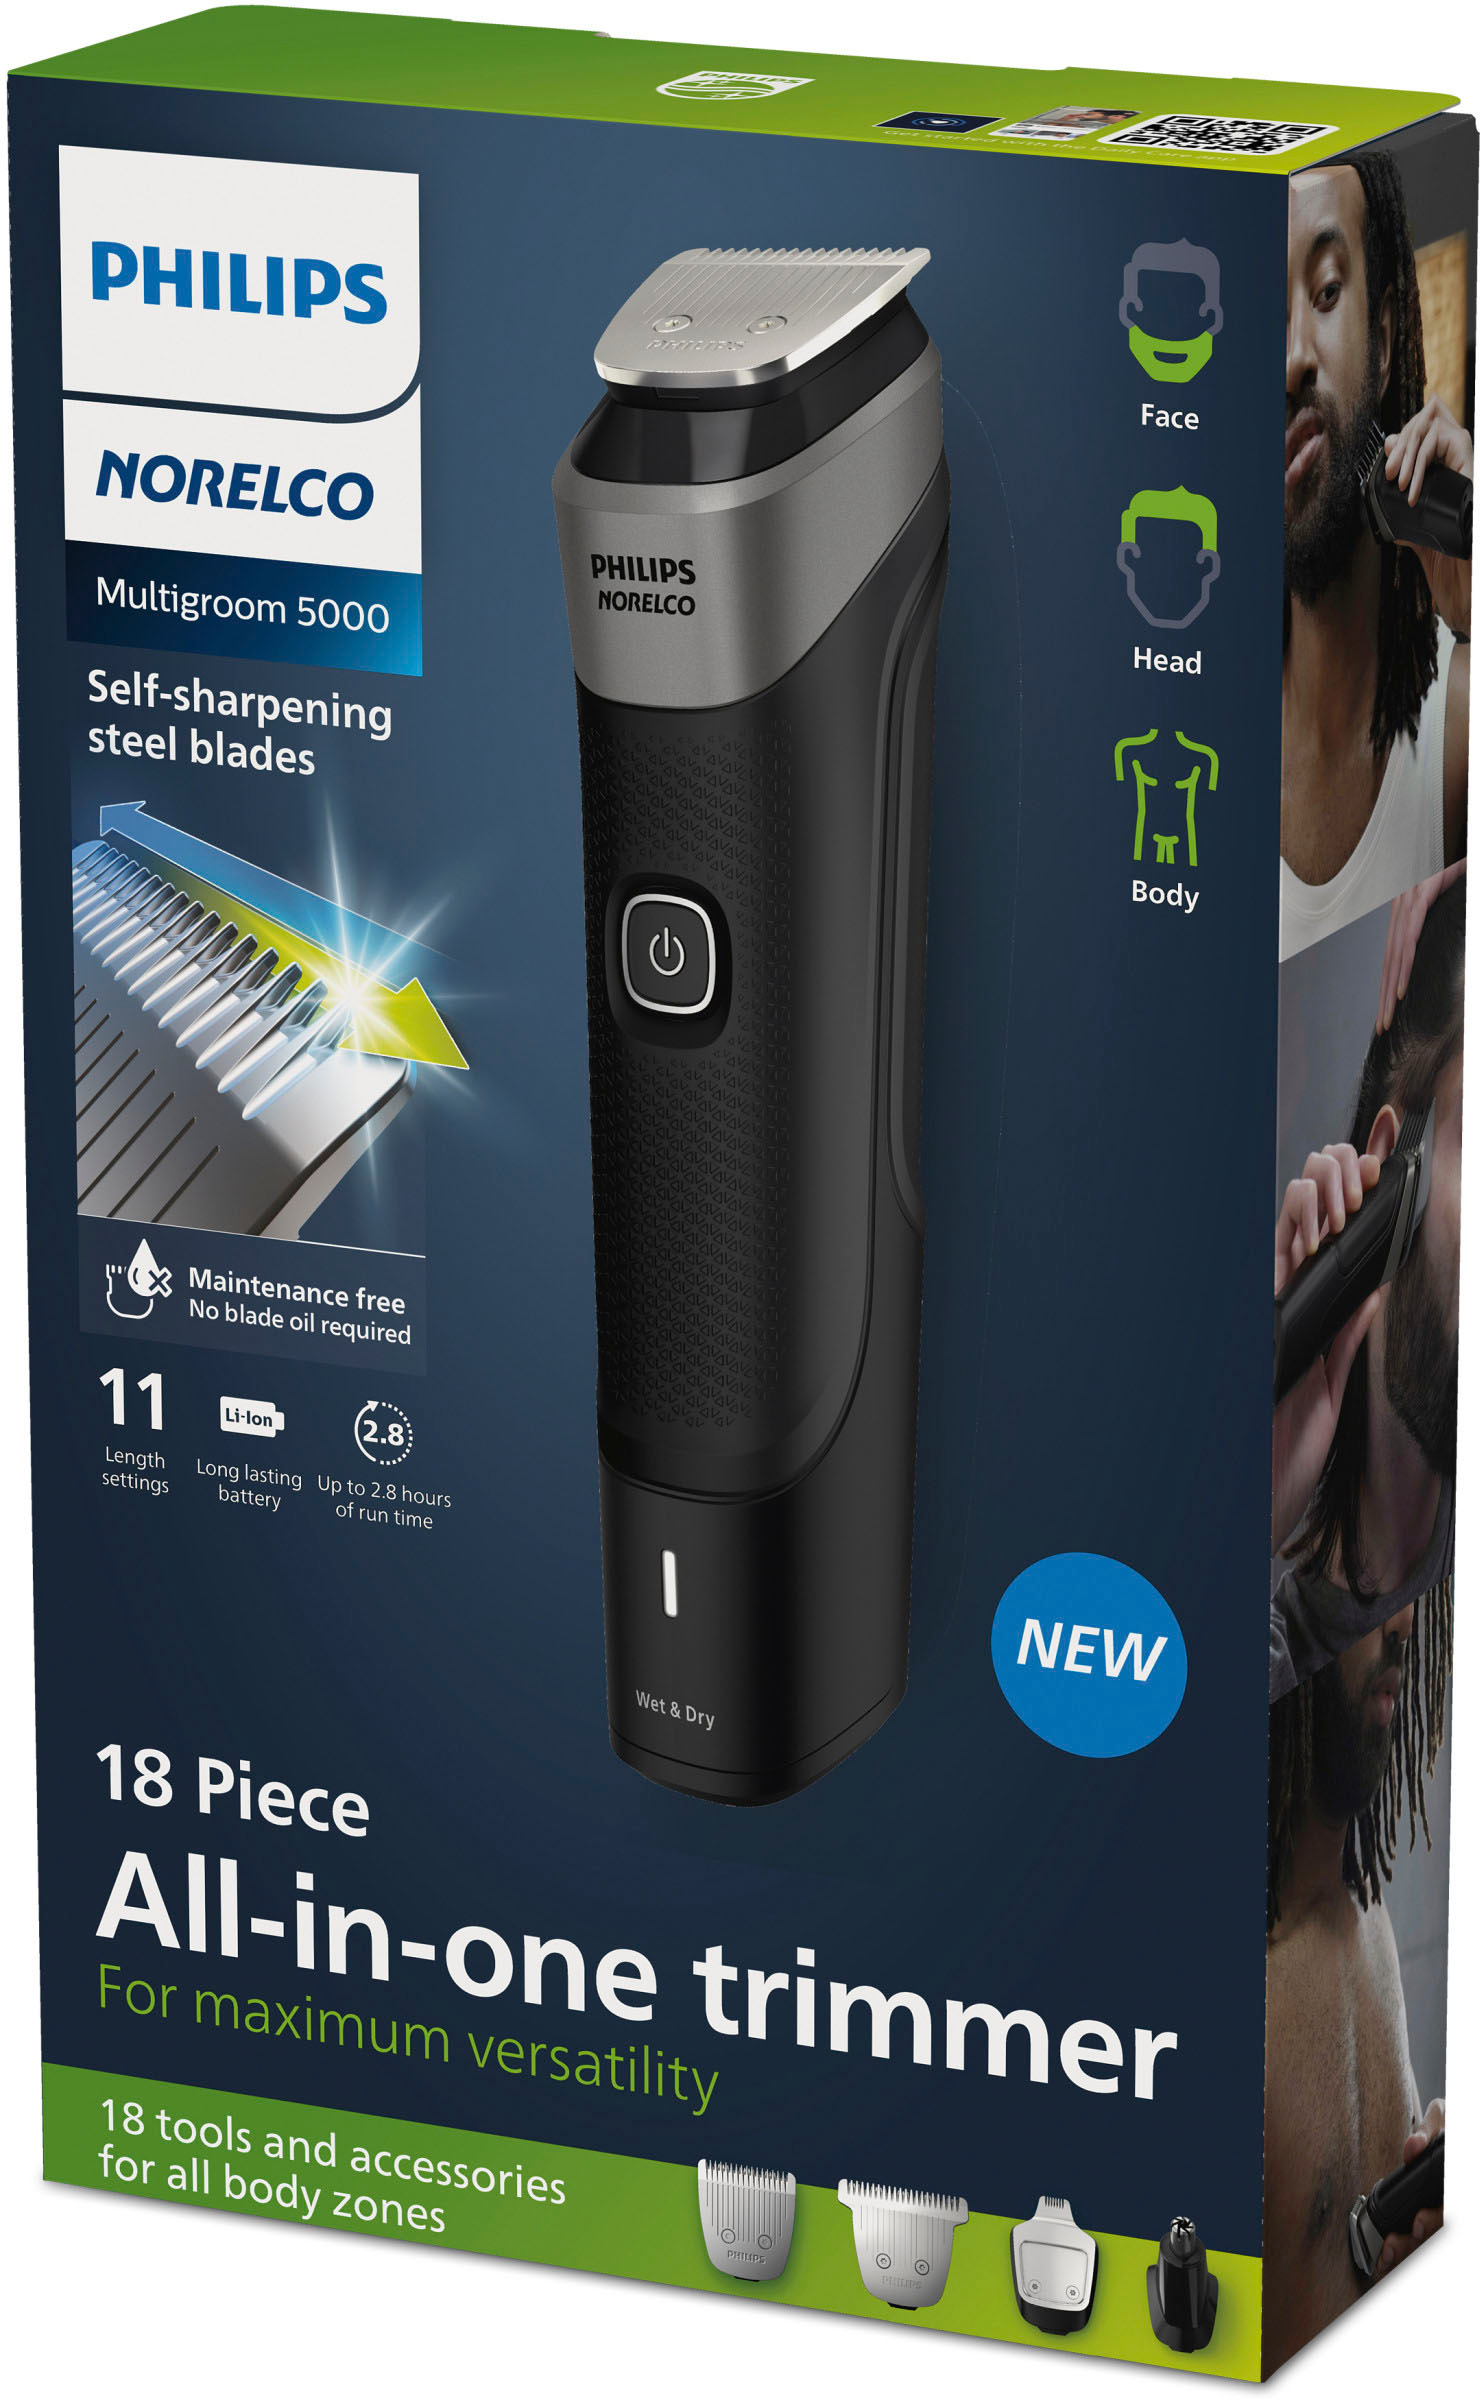 Philips Norelco Multigroom 5000 18 Piece, Beard Face, Hair, Body Trimmer for Silver MG5910/49 - Best Buy